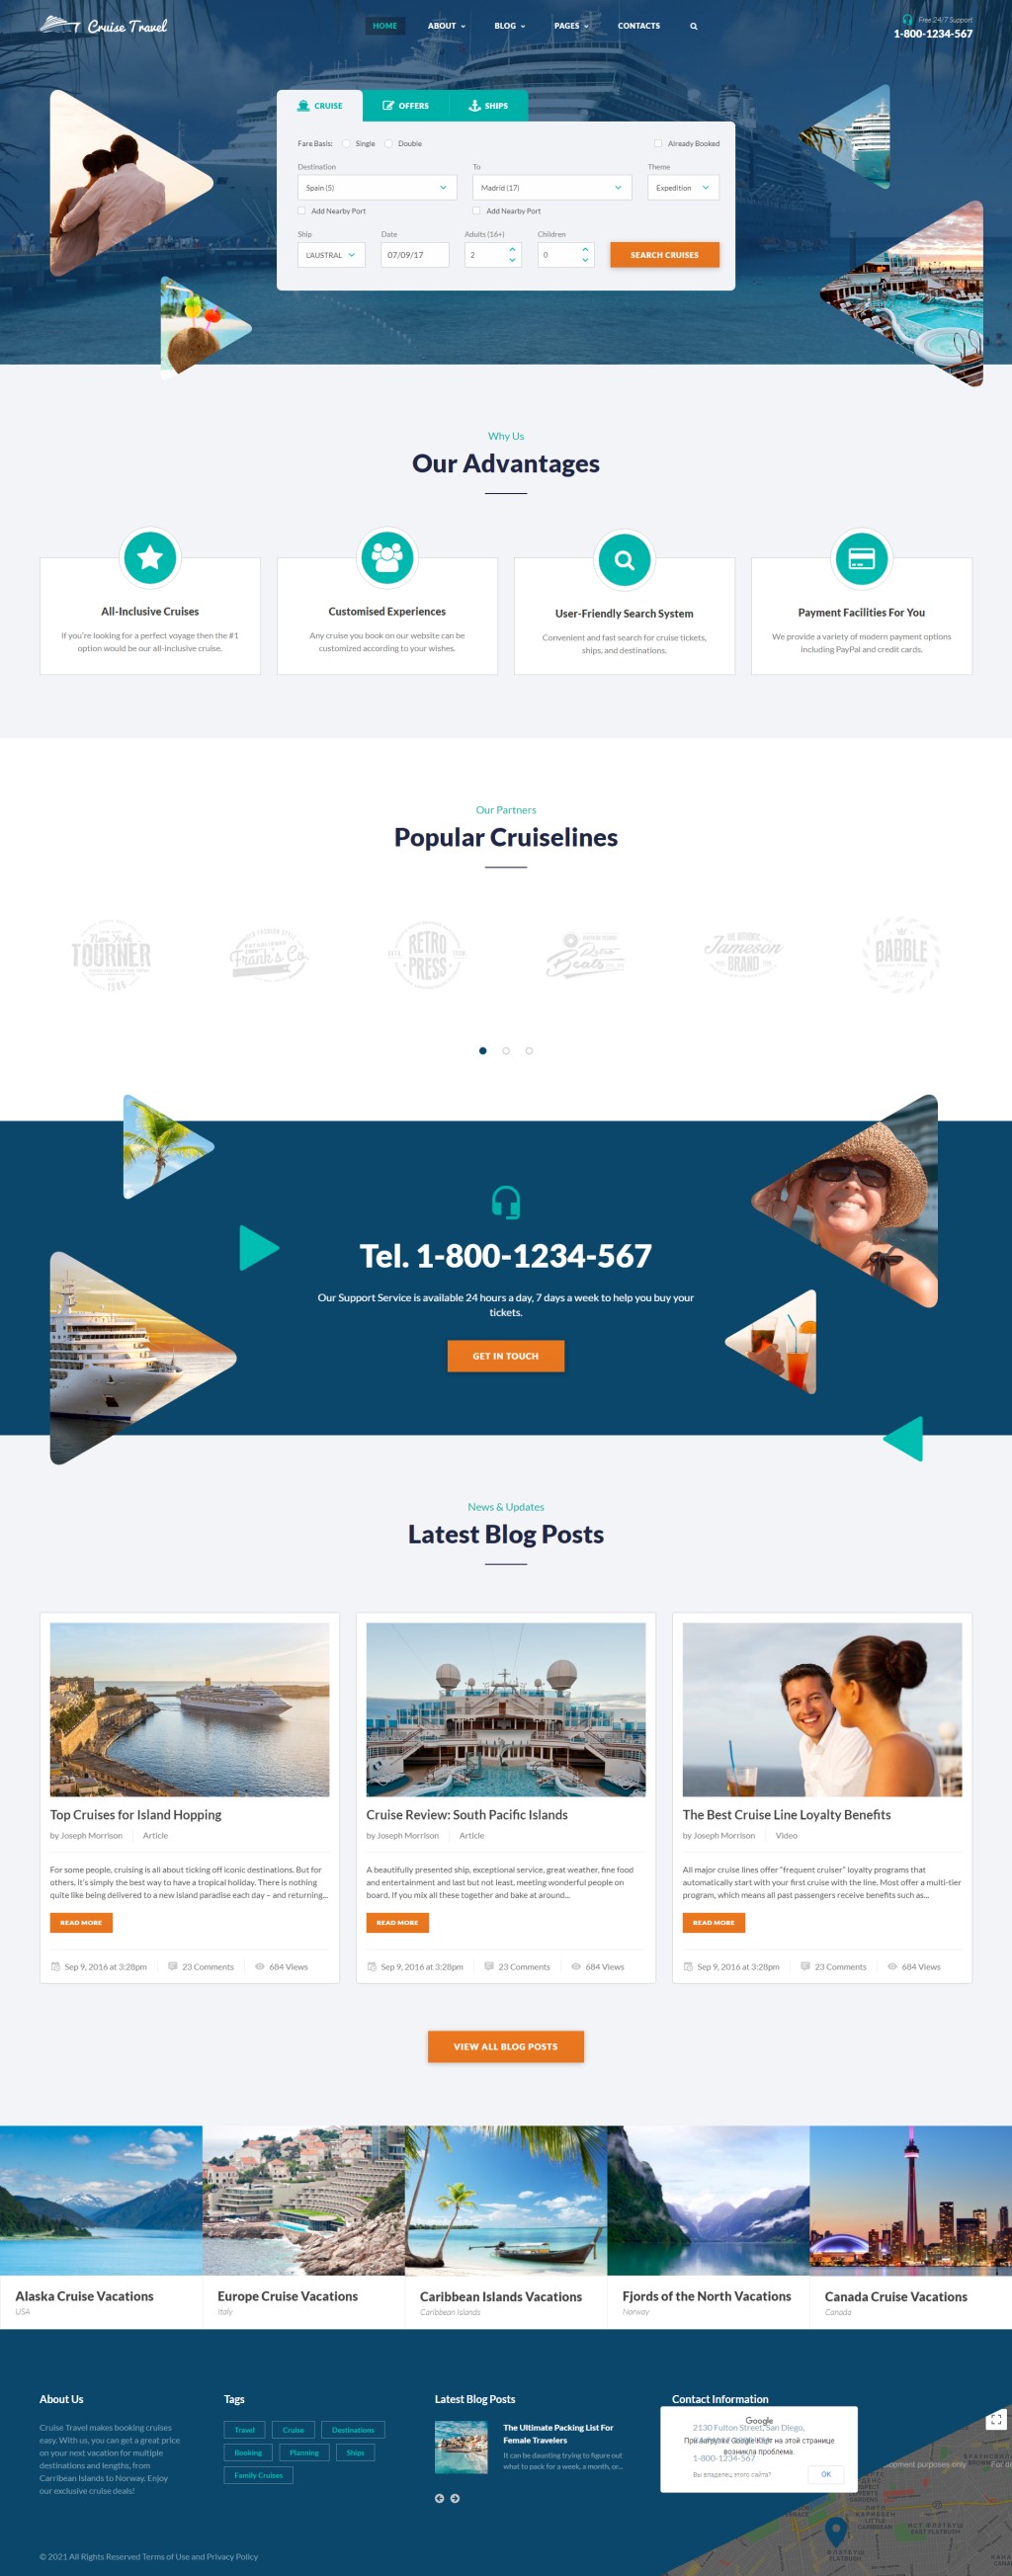 Cruise Travel -   Multipage.   .  62197